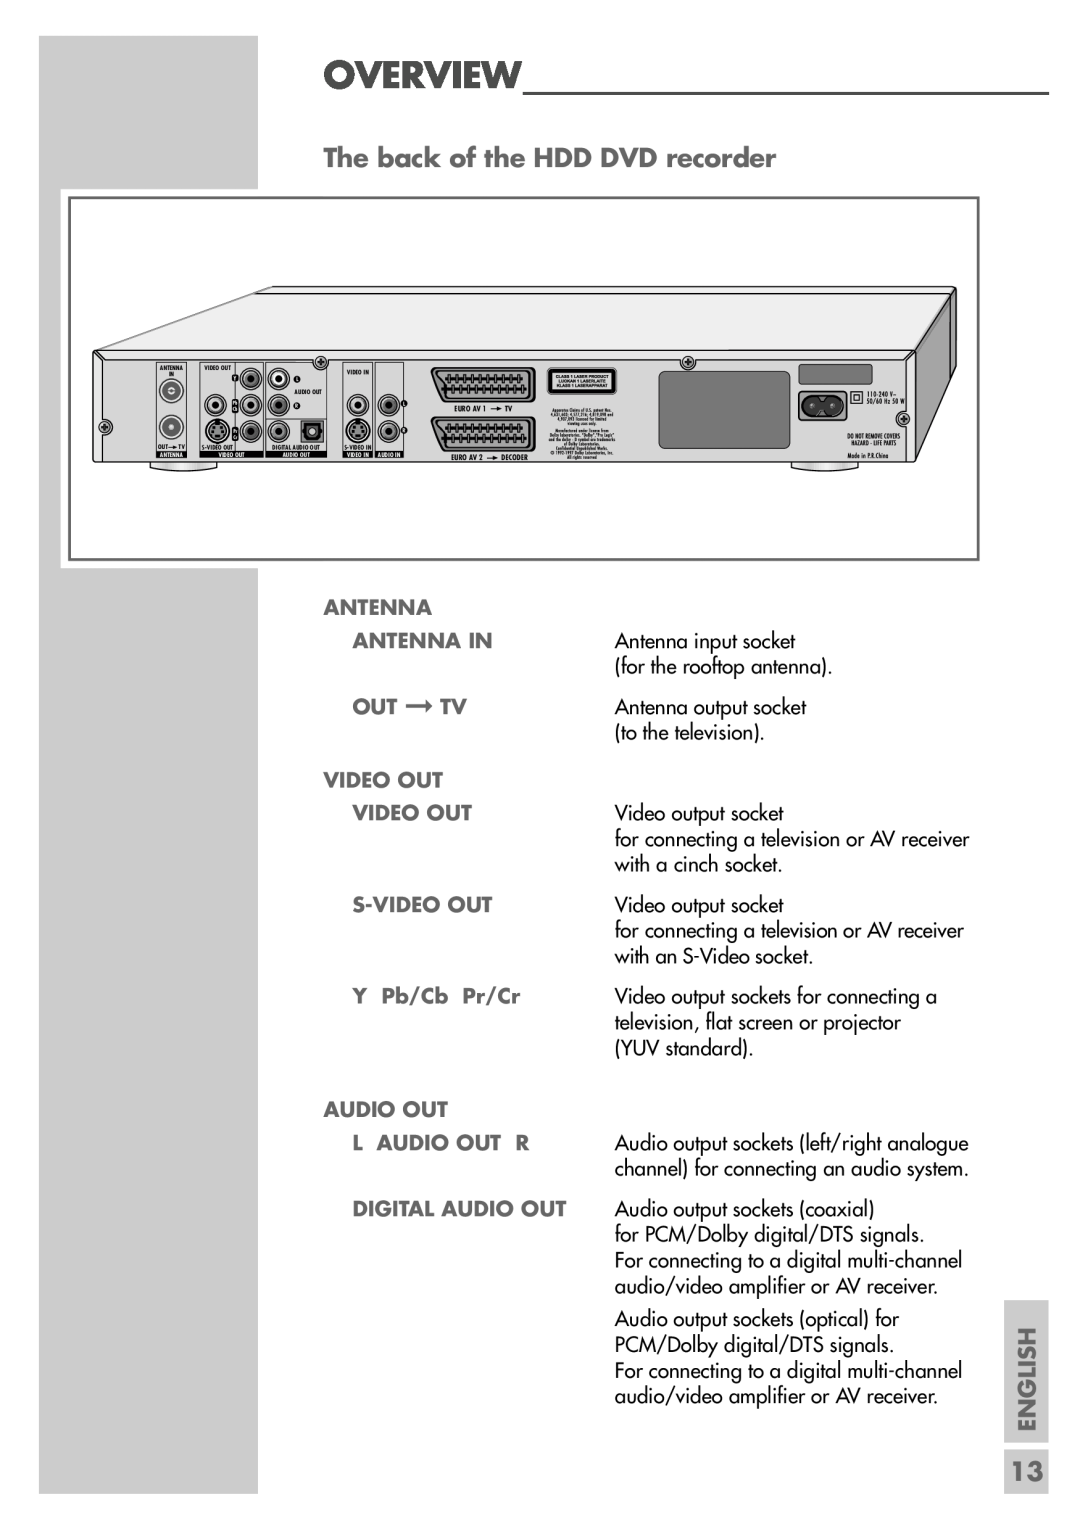 Grundig 5550 HDD manual The back of the HDD DVD recorder, Overview, English 